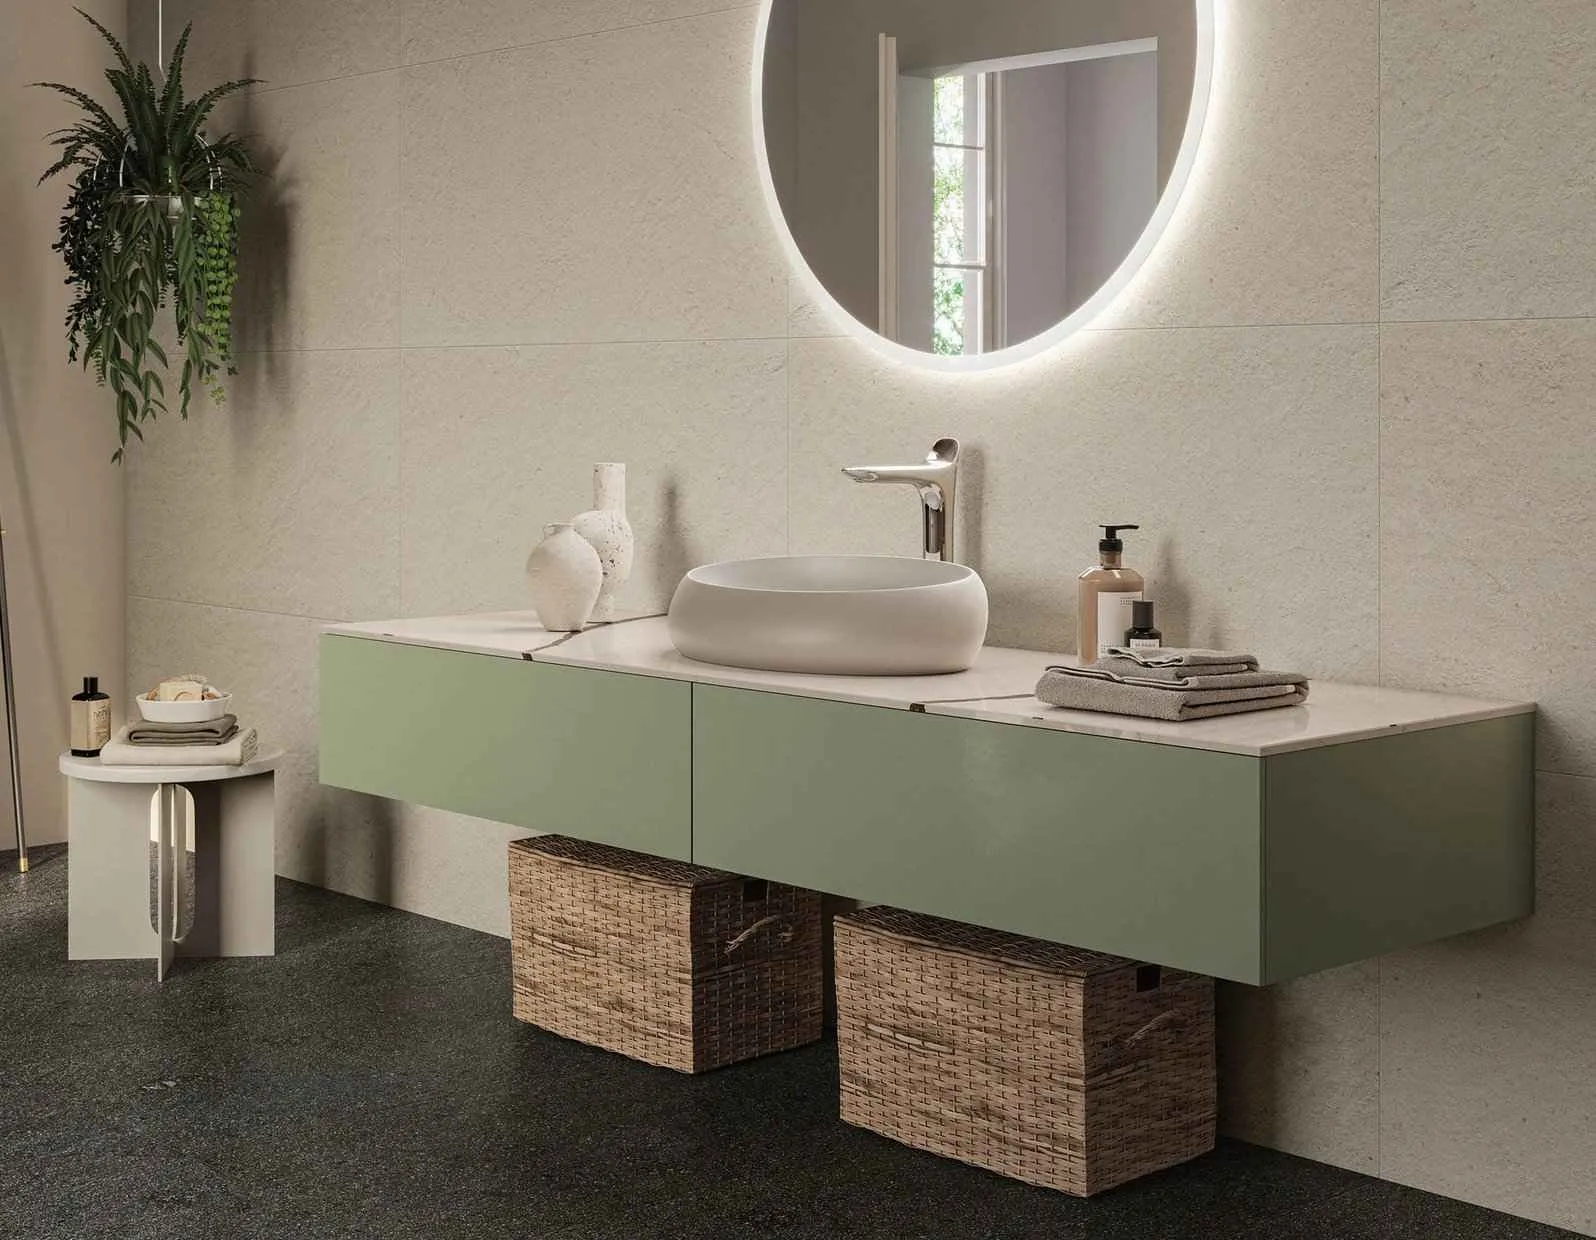 beige bath ،e with green cabinets, round mirror with LED lights, washbasin and wall tiles